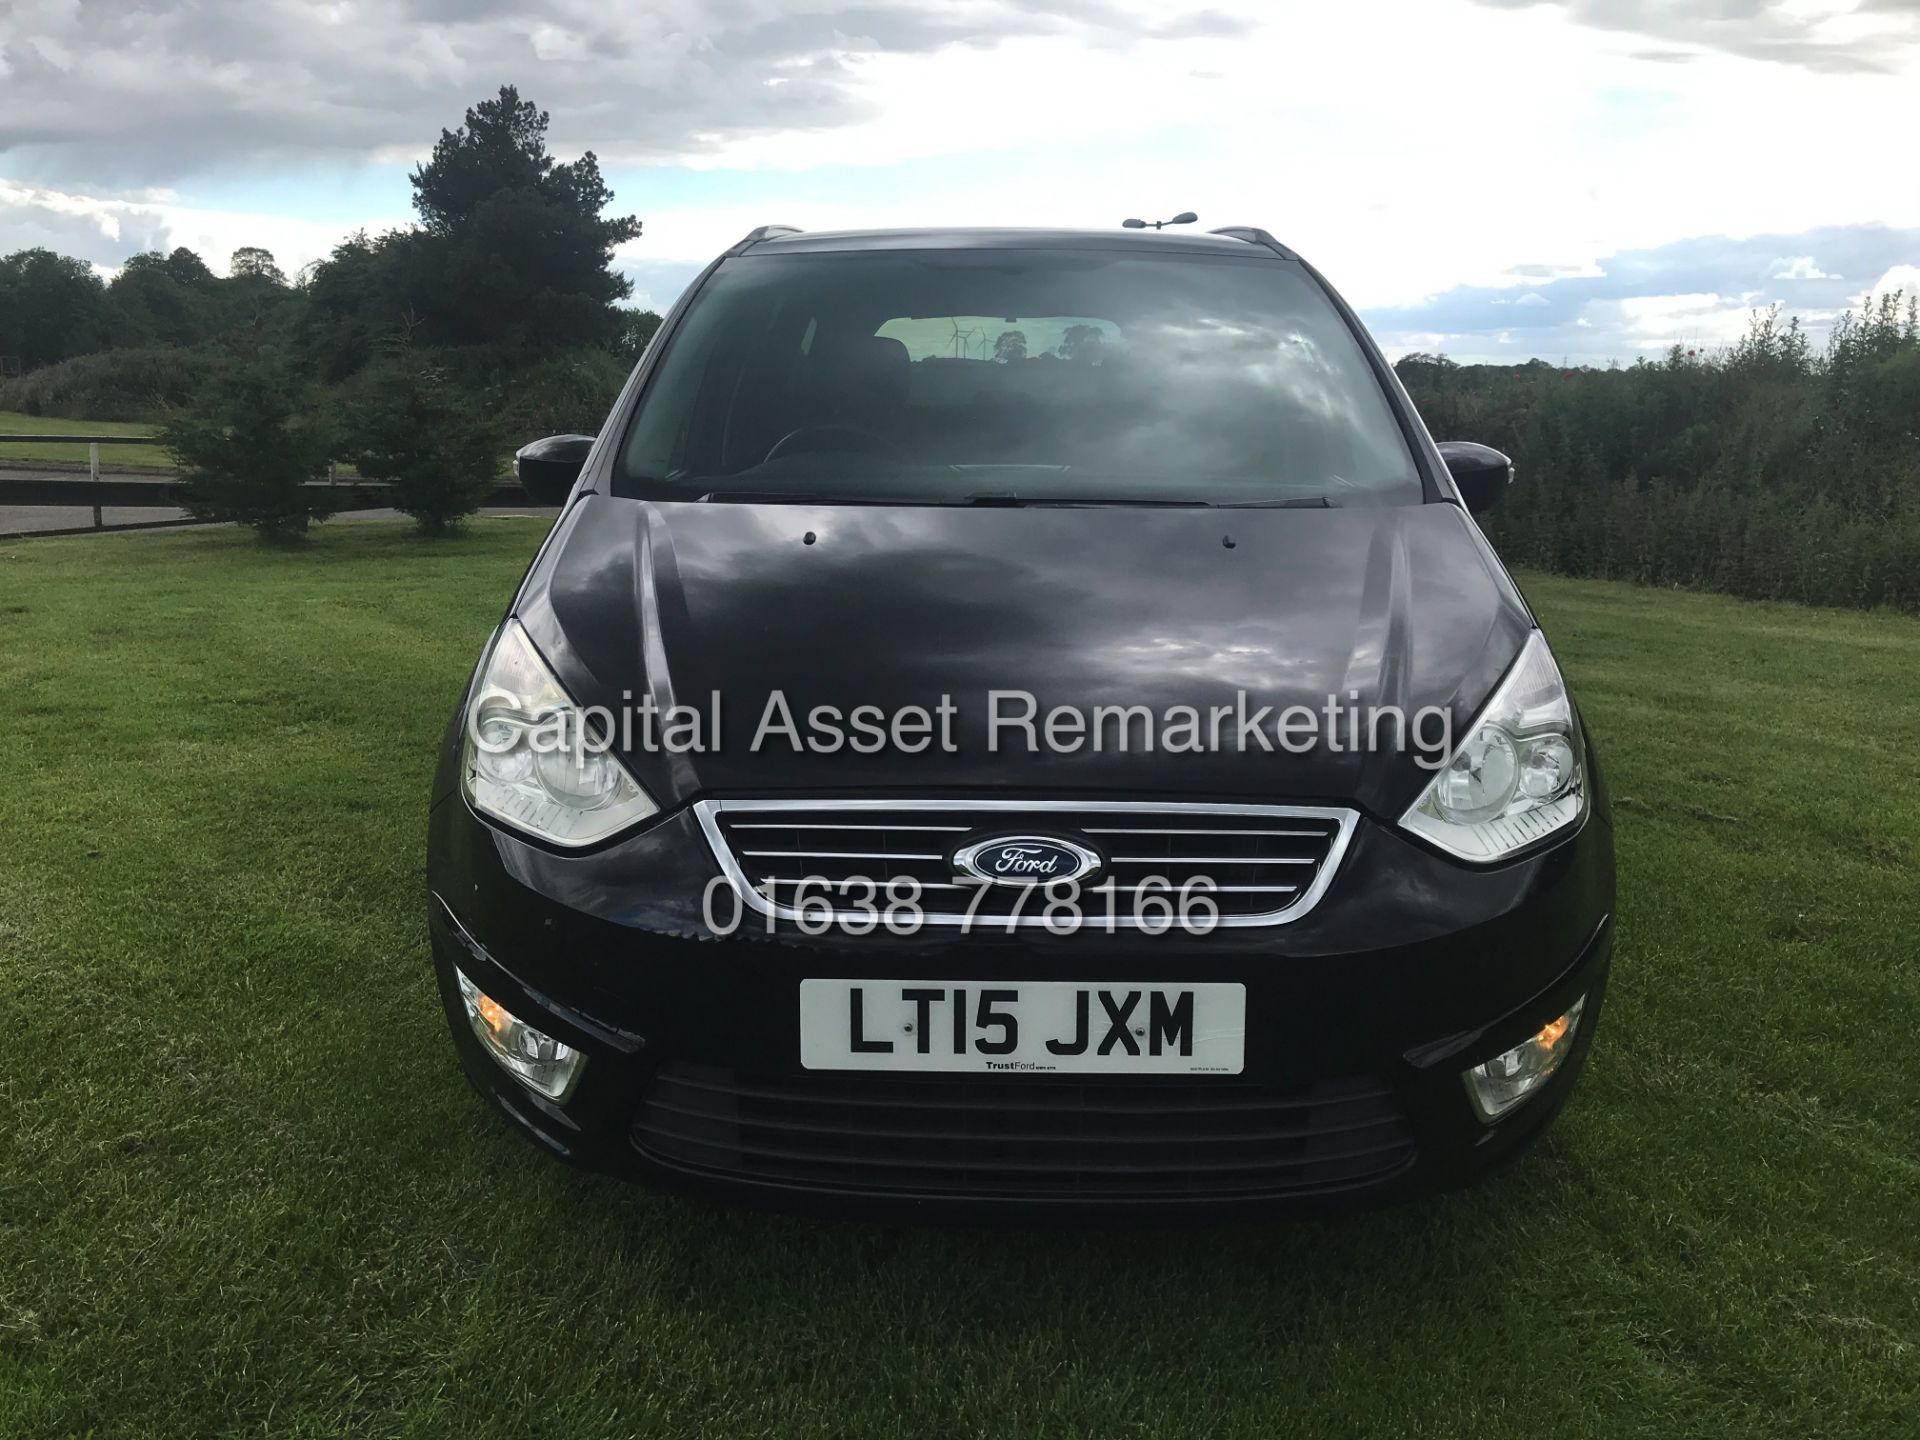 (ON SALE) FORD GALAXY 2.0TDCI "ZETEC" AUTOMATIC 7 SEATER (15 REG) AIR CON - ELEC PACK *NO VAT* - Image 3 of 18